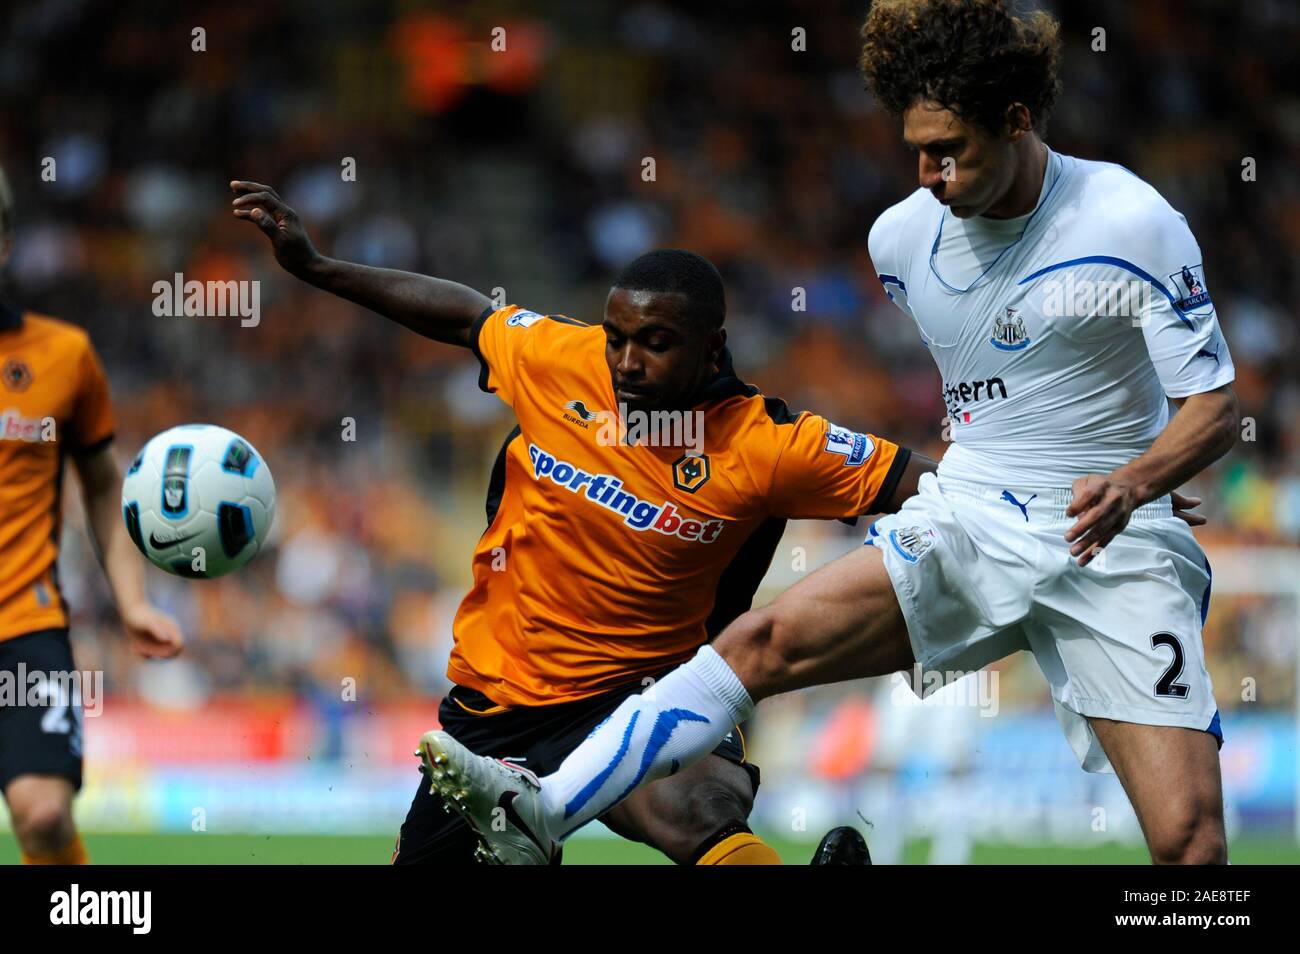 WOLVERHAMPTON, UNITED KINGDOM, AUGUST 28 2010:Wolves striker Sylvan Ebanks-Blake is just beaten to the ball by Newcastle defender Fabricio Coloccini during the Premiership Match between Wolverhampton Wanderers and Newcastle United at Molineux, Wolverhampton, United Kingdom. Photographer:Paul Roberts / OneUpTop/Alamy. Stock Photo